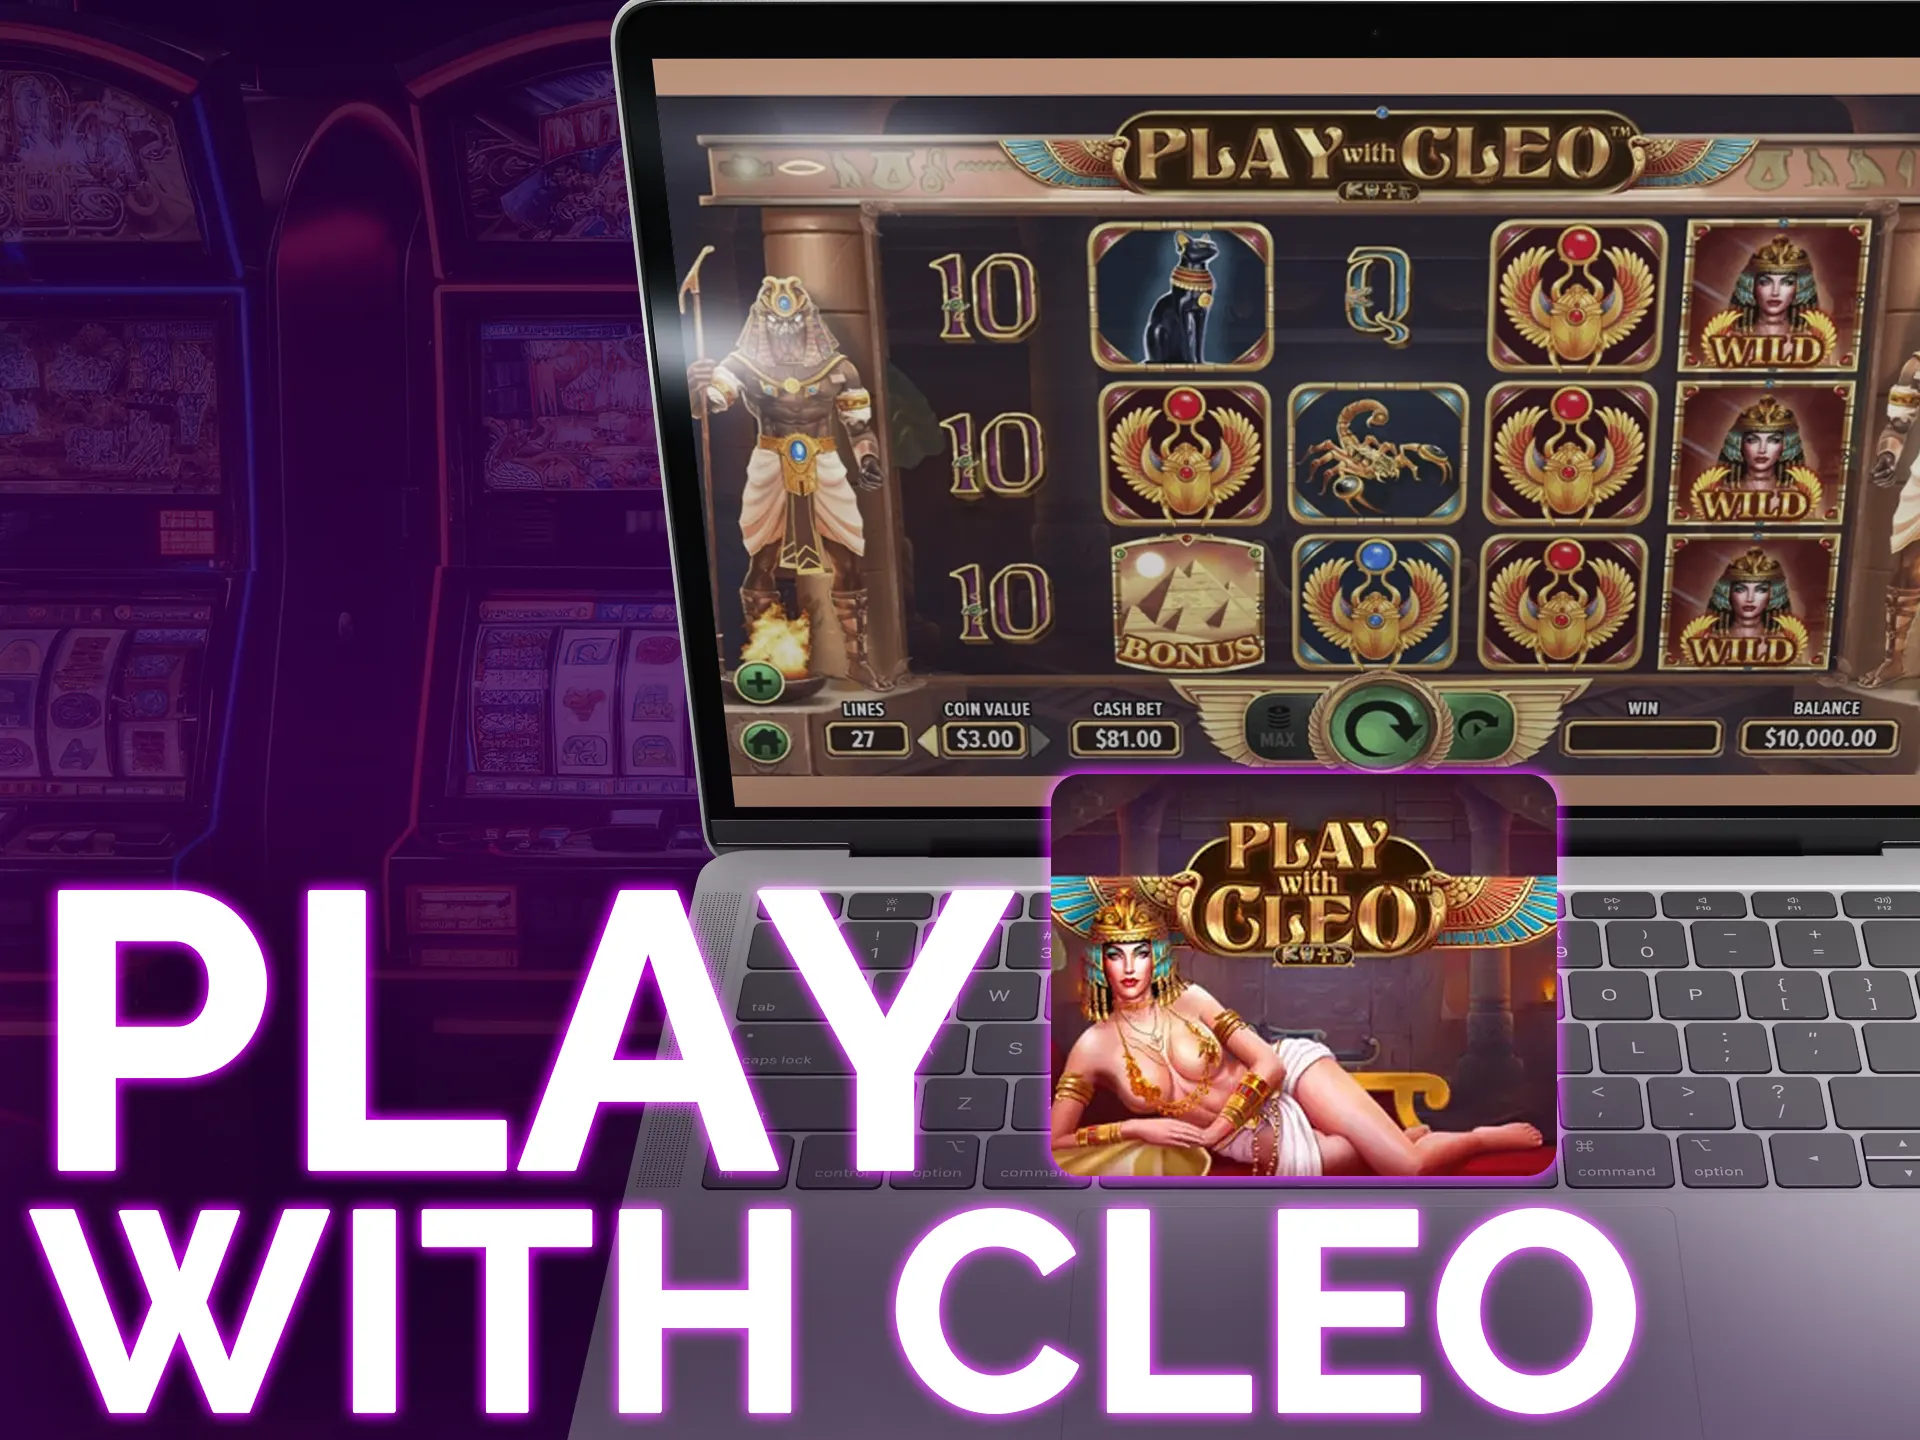 Enjoy Play With Cleo by Dragon Gaming, providing exciting bonuses.